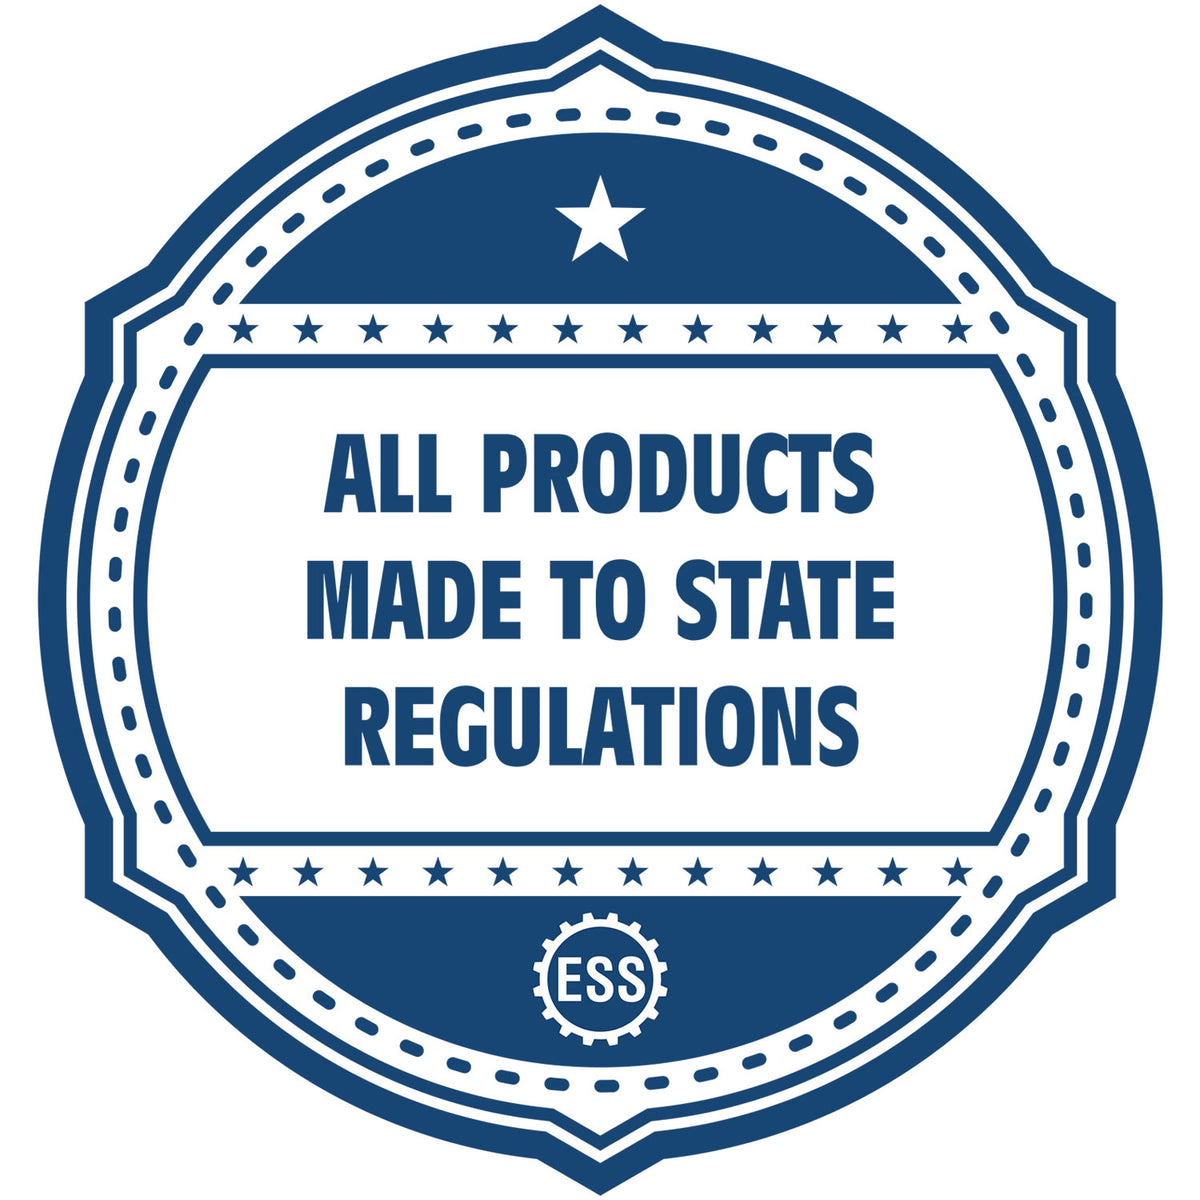 A blue icon or badge for the Hybrid Nebraska Engineer Seal showing that this product is made in compliance with state regulations.